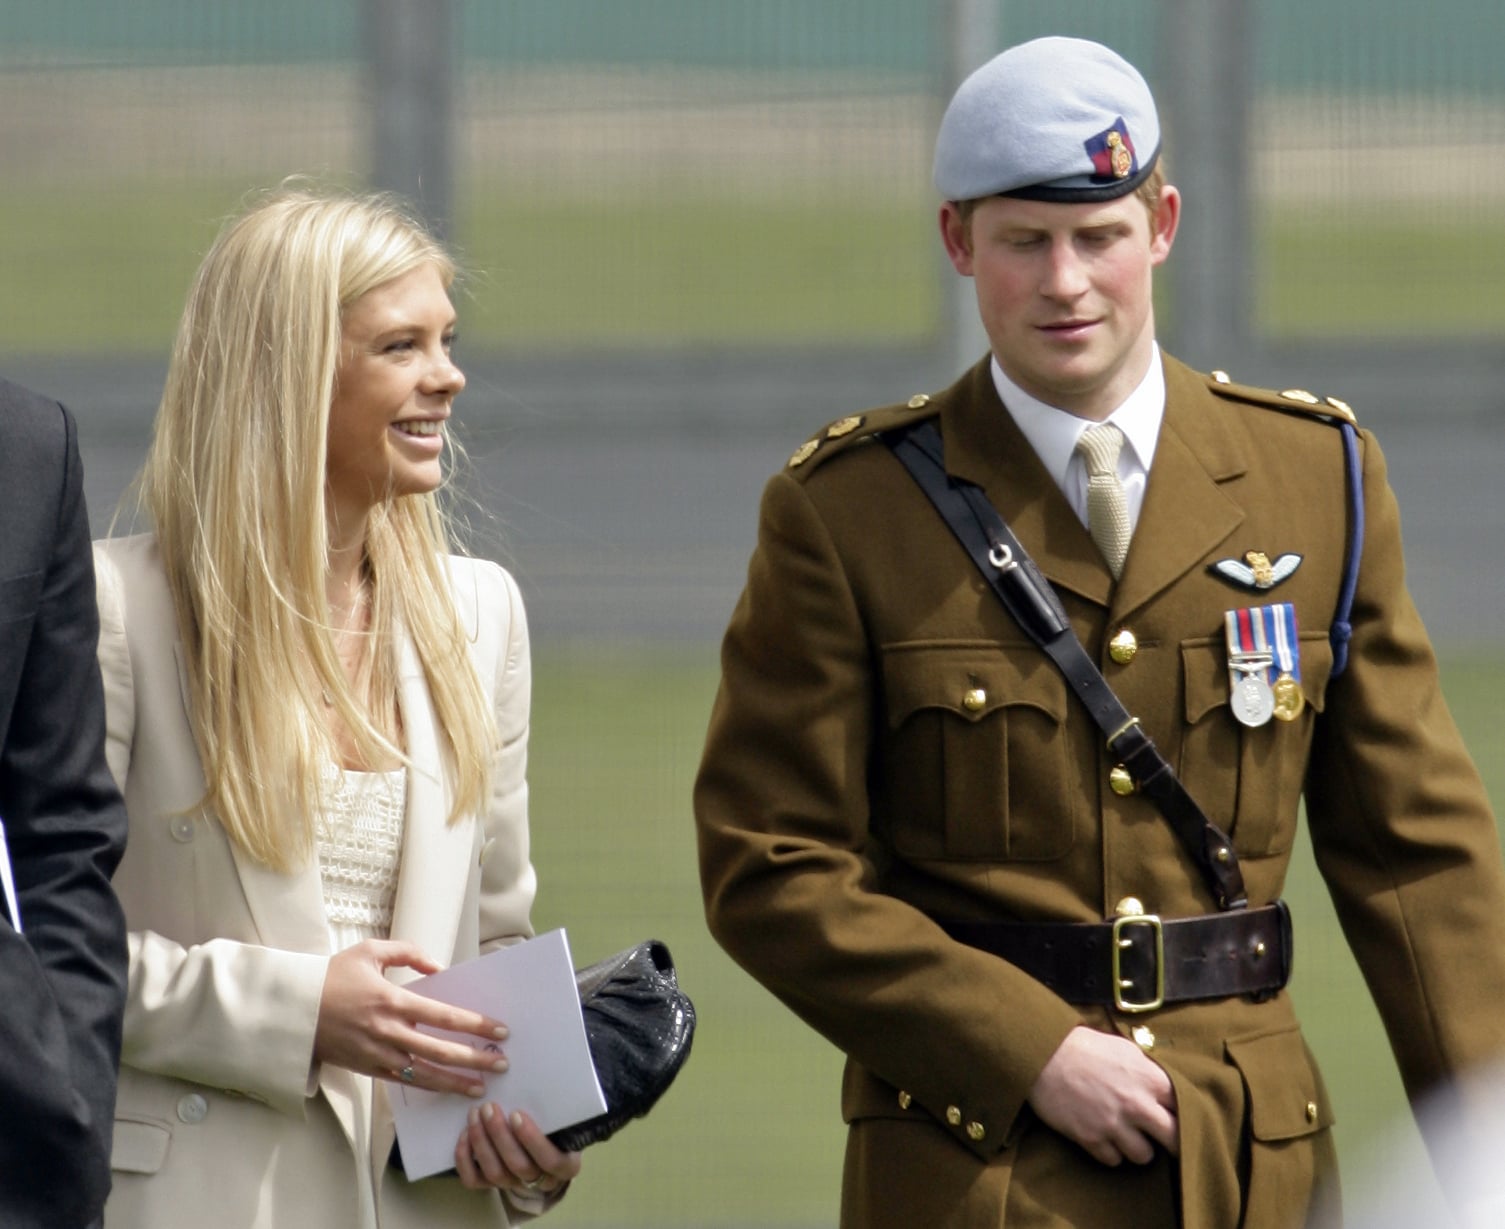 ANDOVER, UNITED KINGDOM - MAY 07: (EMBARGOED FOR PUBLICATION IN UK NEWSPAPERS UNTIL 48 HOURS AFTER CREATE DATE AND TIME) Chelsy Davy and boyfriend HRH Prince Harry attend Harry's Army Air Corps pilots course graduation ceremony at the Museum of Army Flying on May 7, 2010 in Andover, England. (Photo by Indigo/Getty Images)